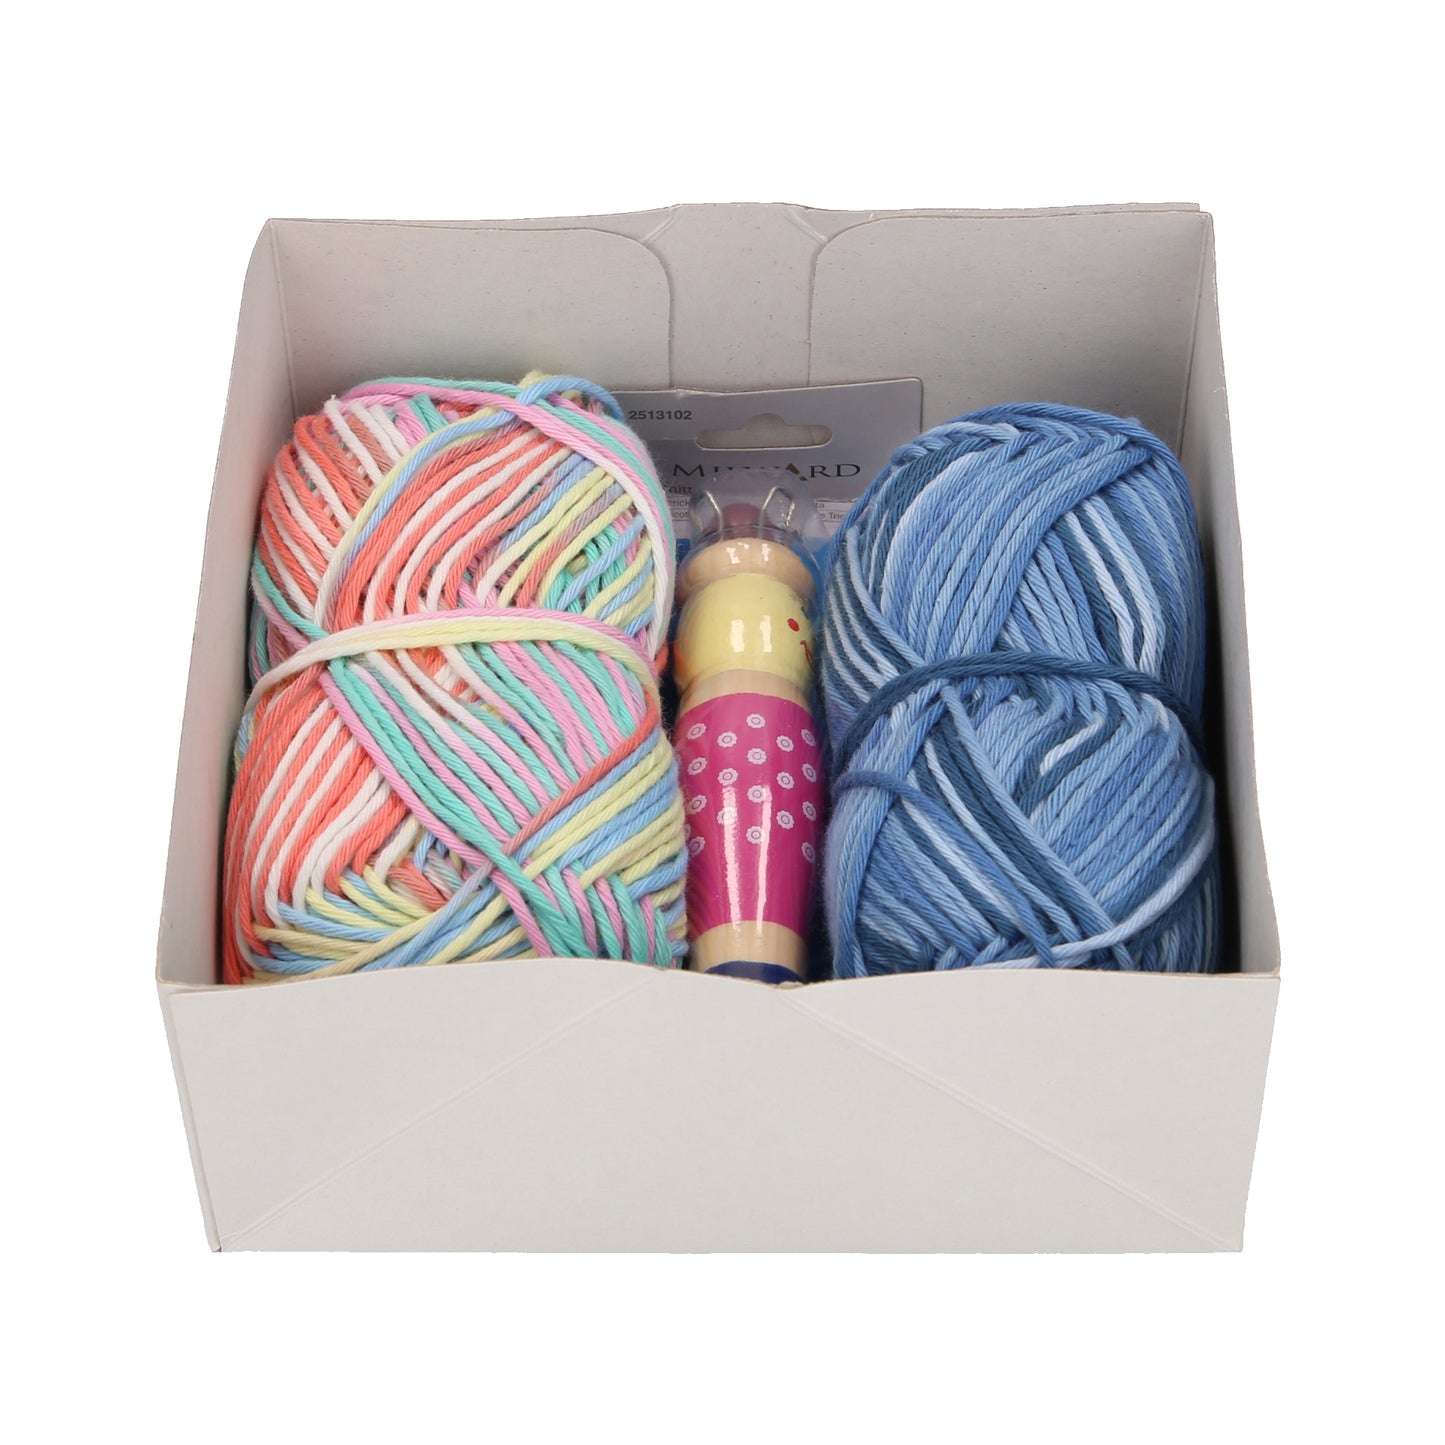 French Knitting Kit for Beginners **SALE**